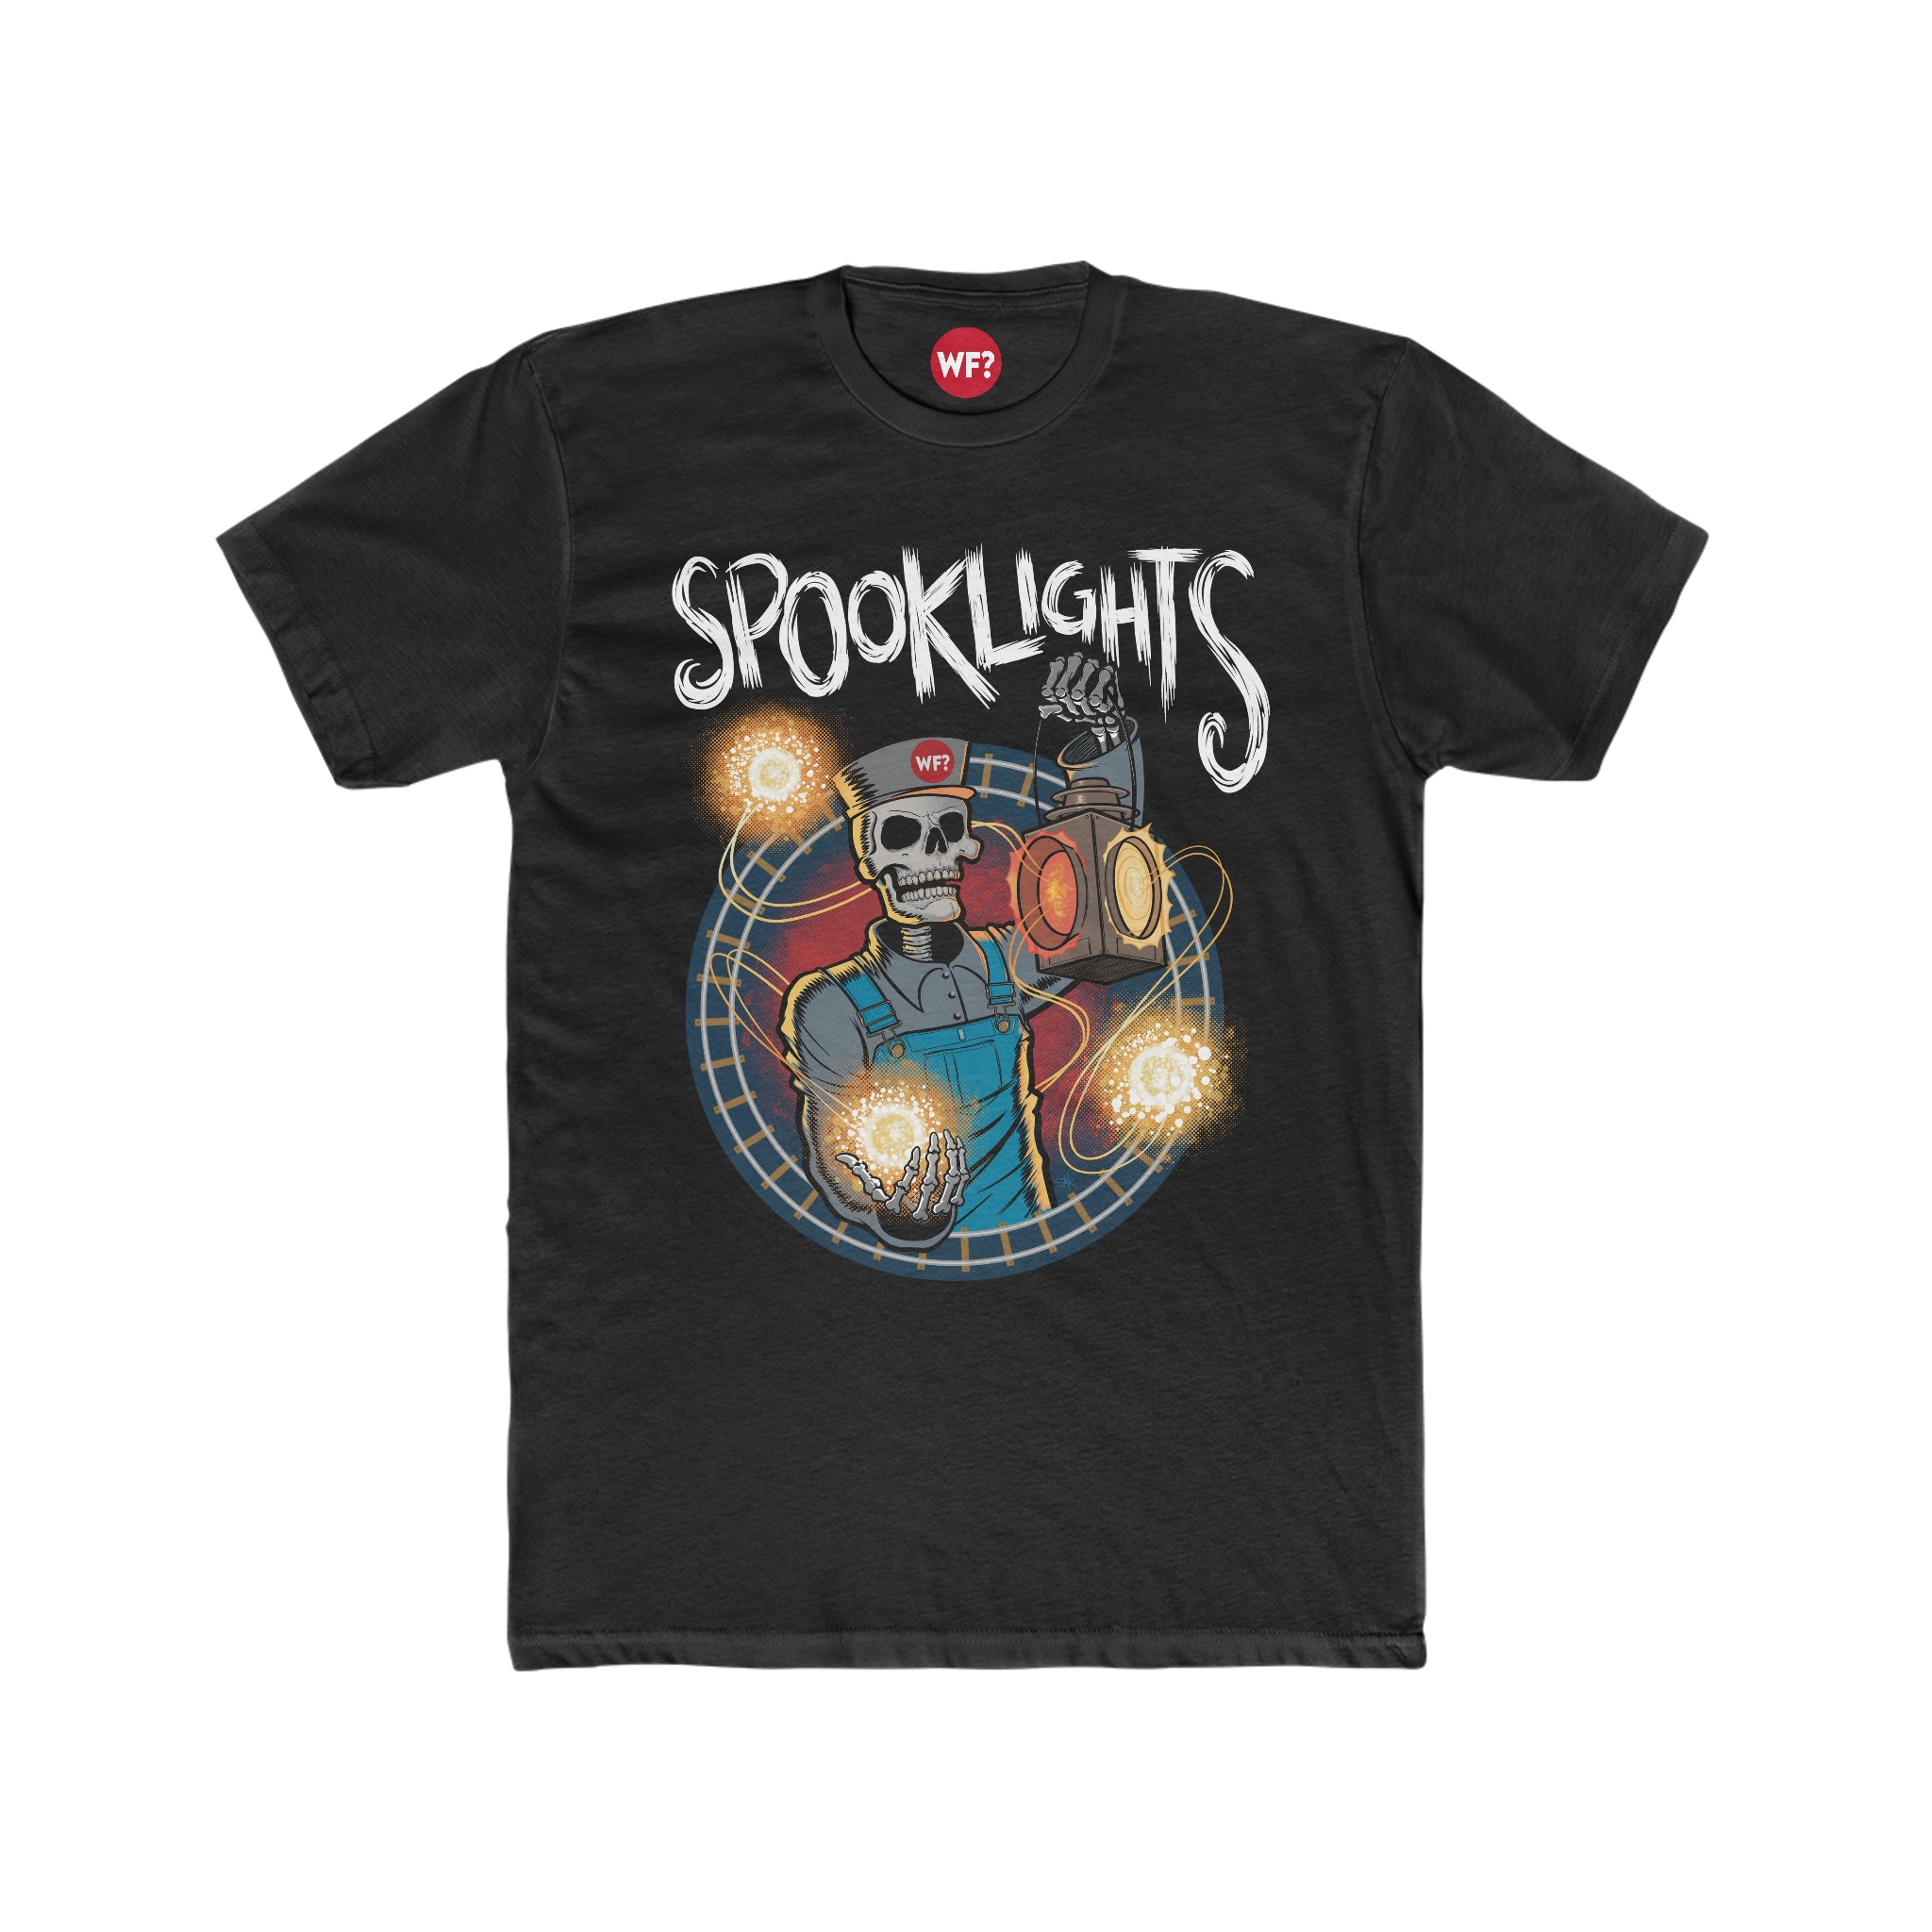 Buy solid-black Spooklights Limited T-Shirt